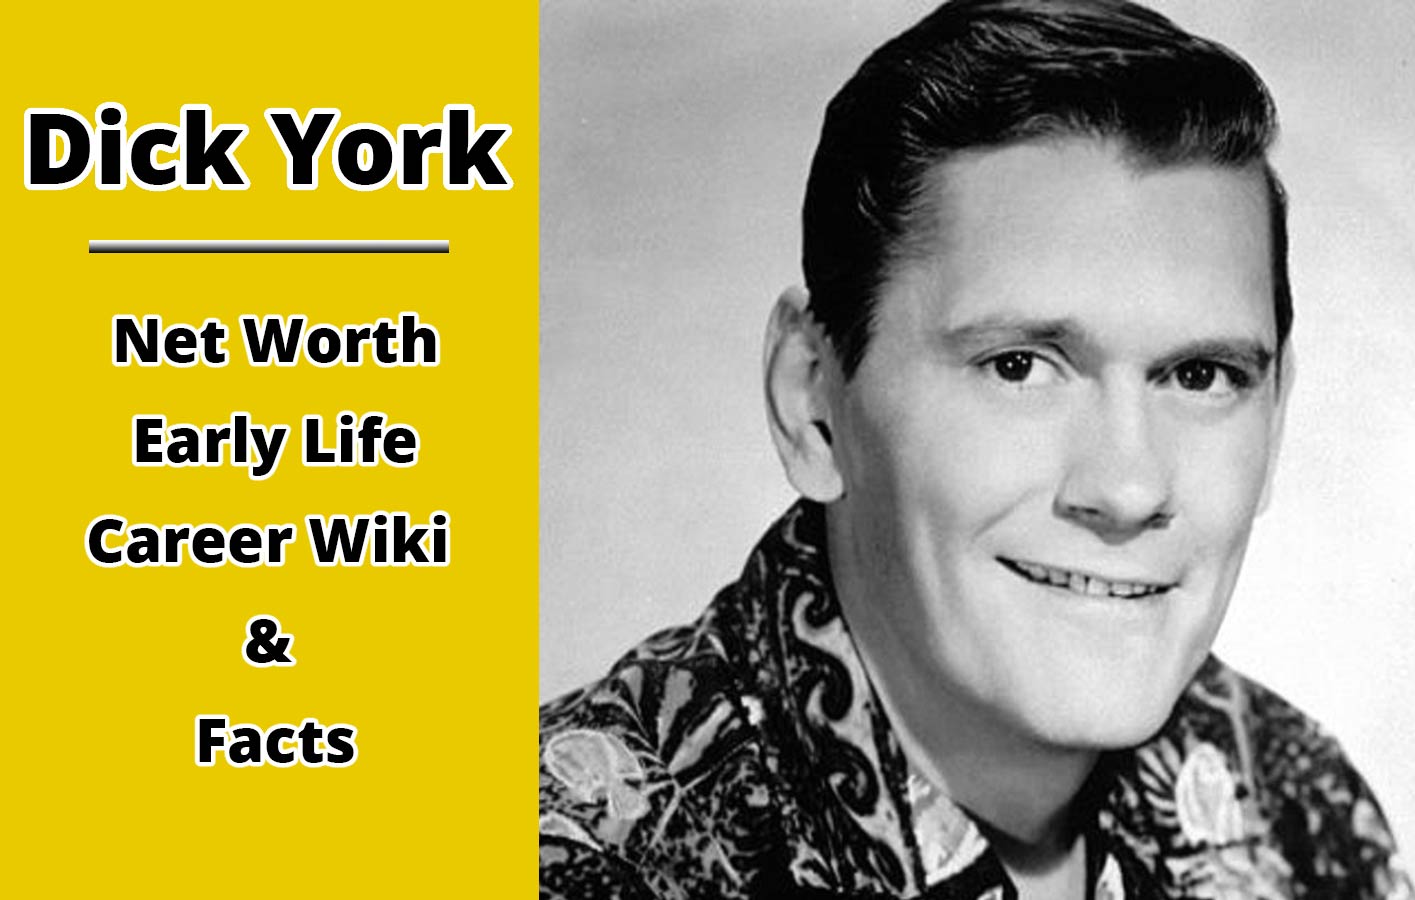 Dick York Net Worth Early Life Career Wiki And Facts